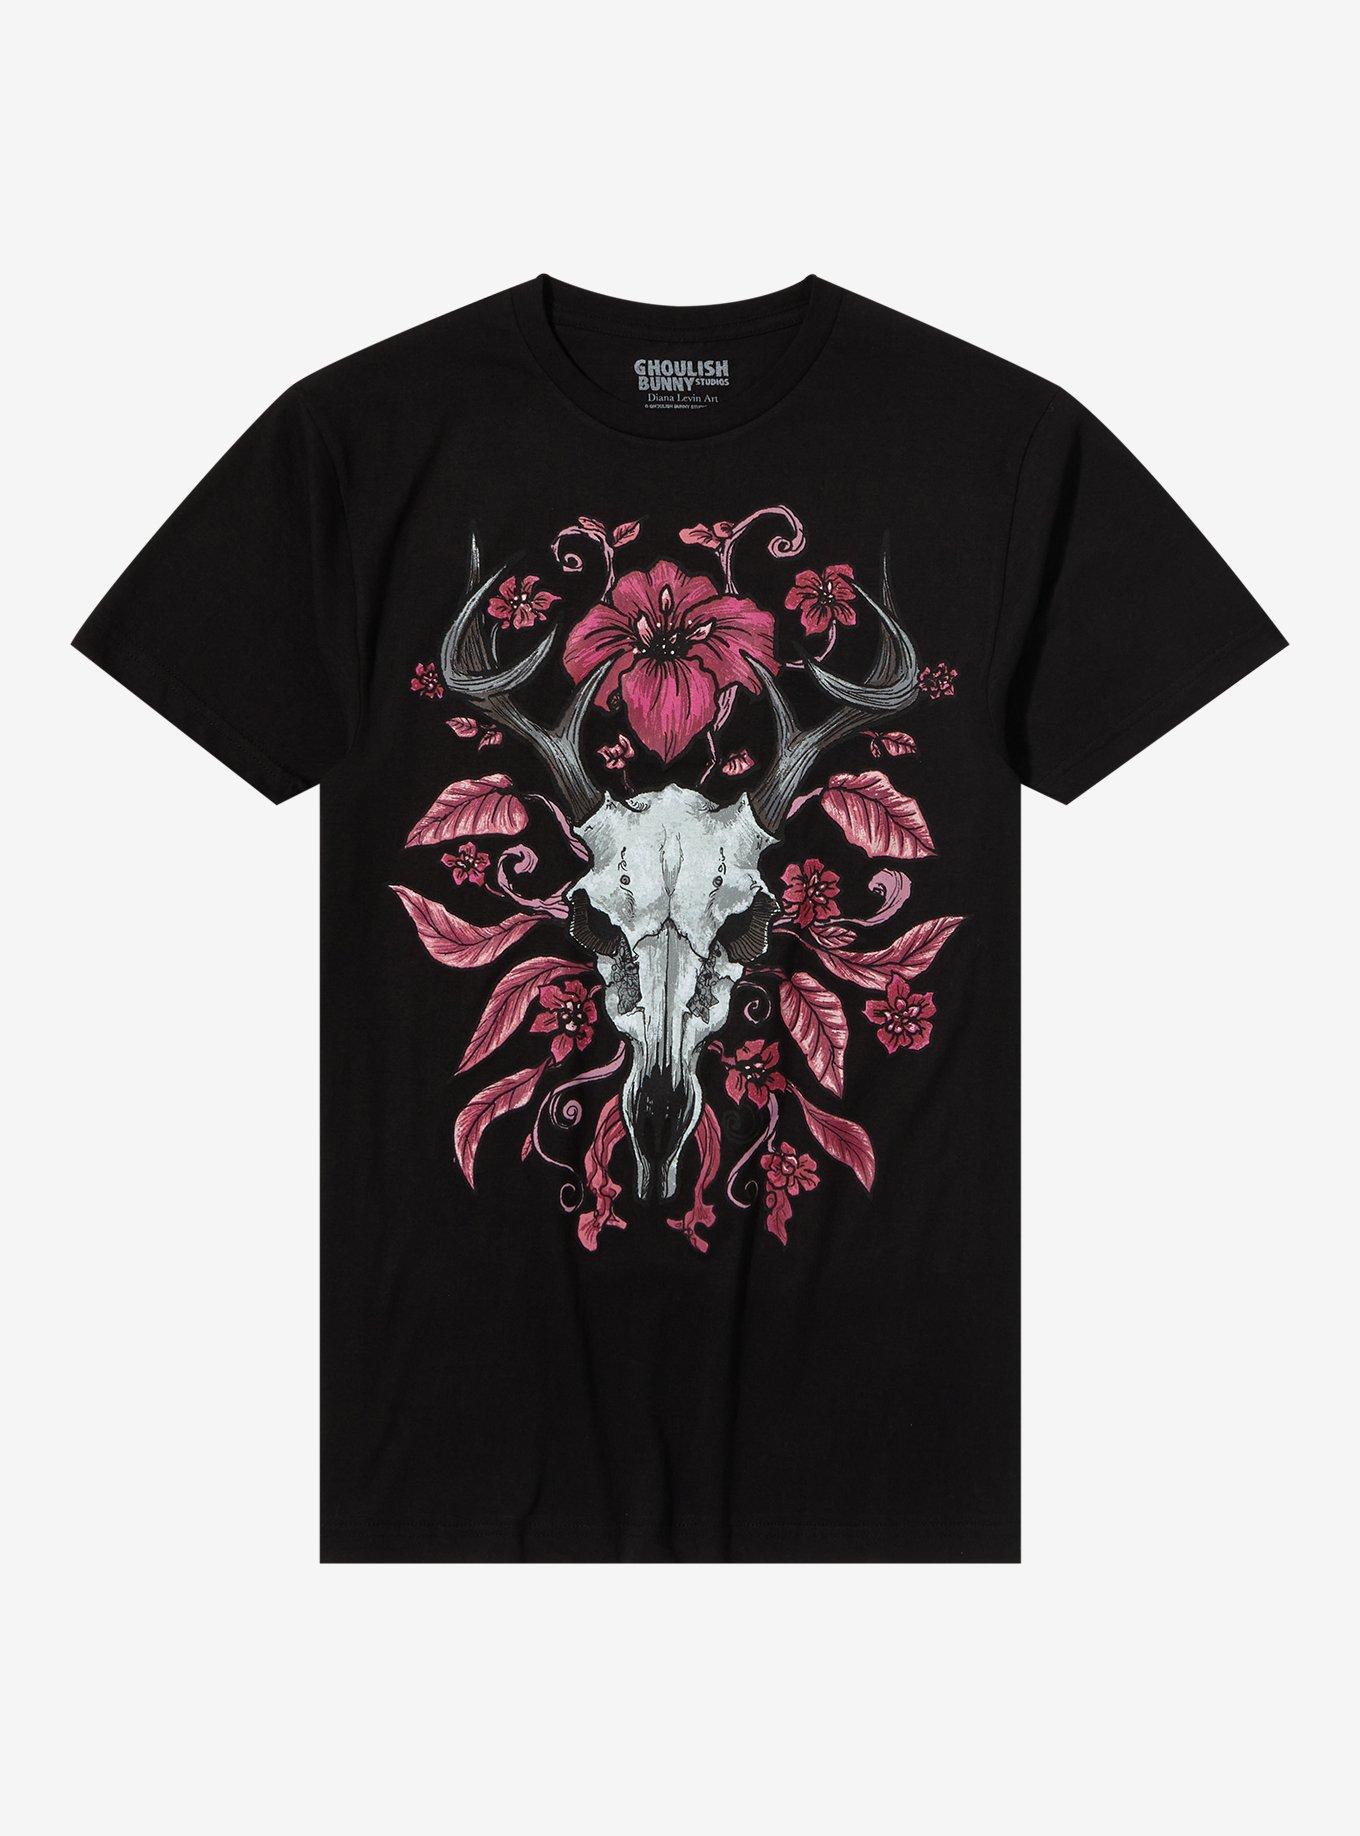 Deer Skull With Flowers T-Shirt By Ghoulish Bunny Studios